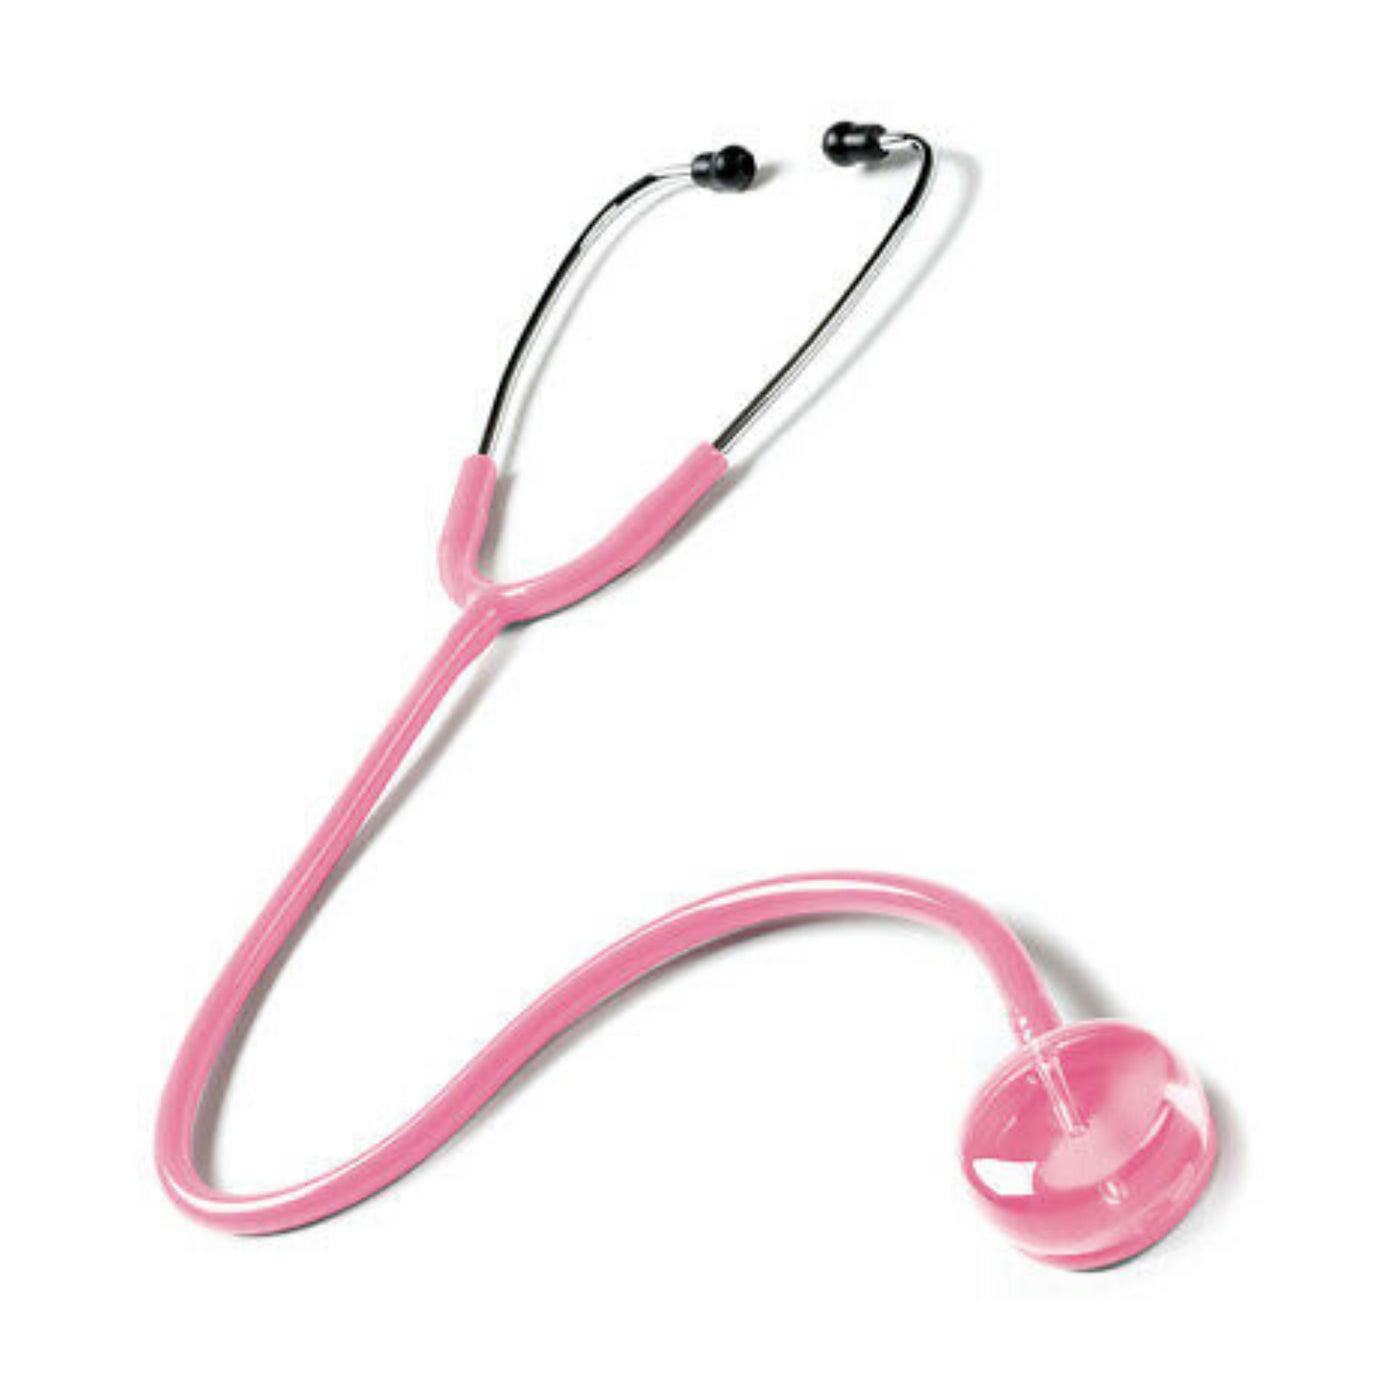 Clear Sound Stethoscope - Pink